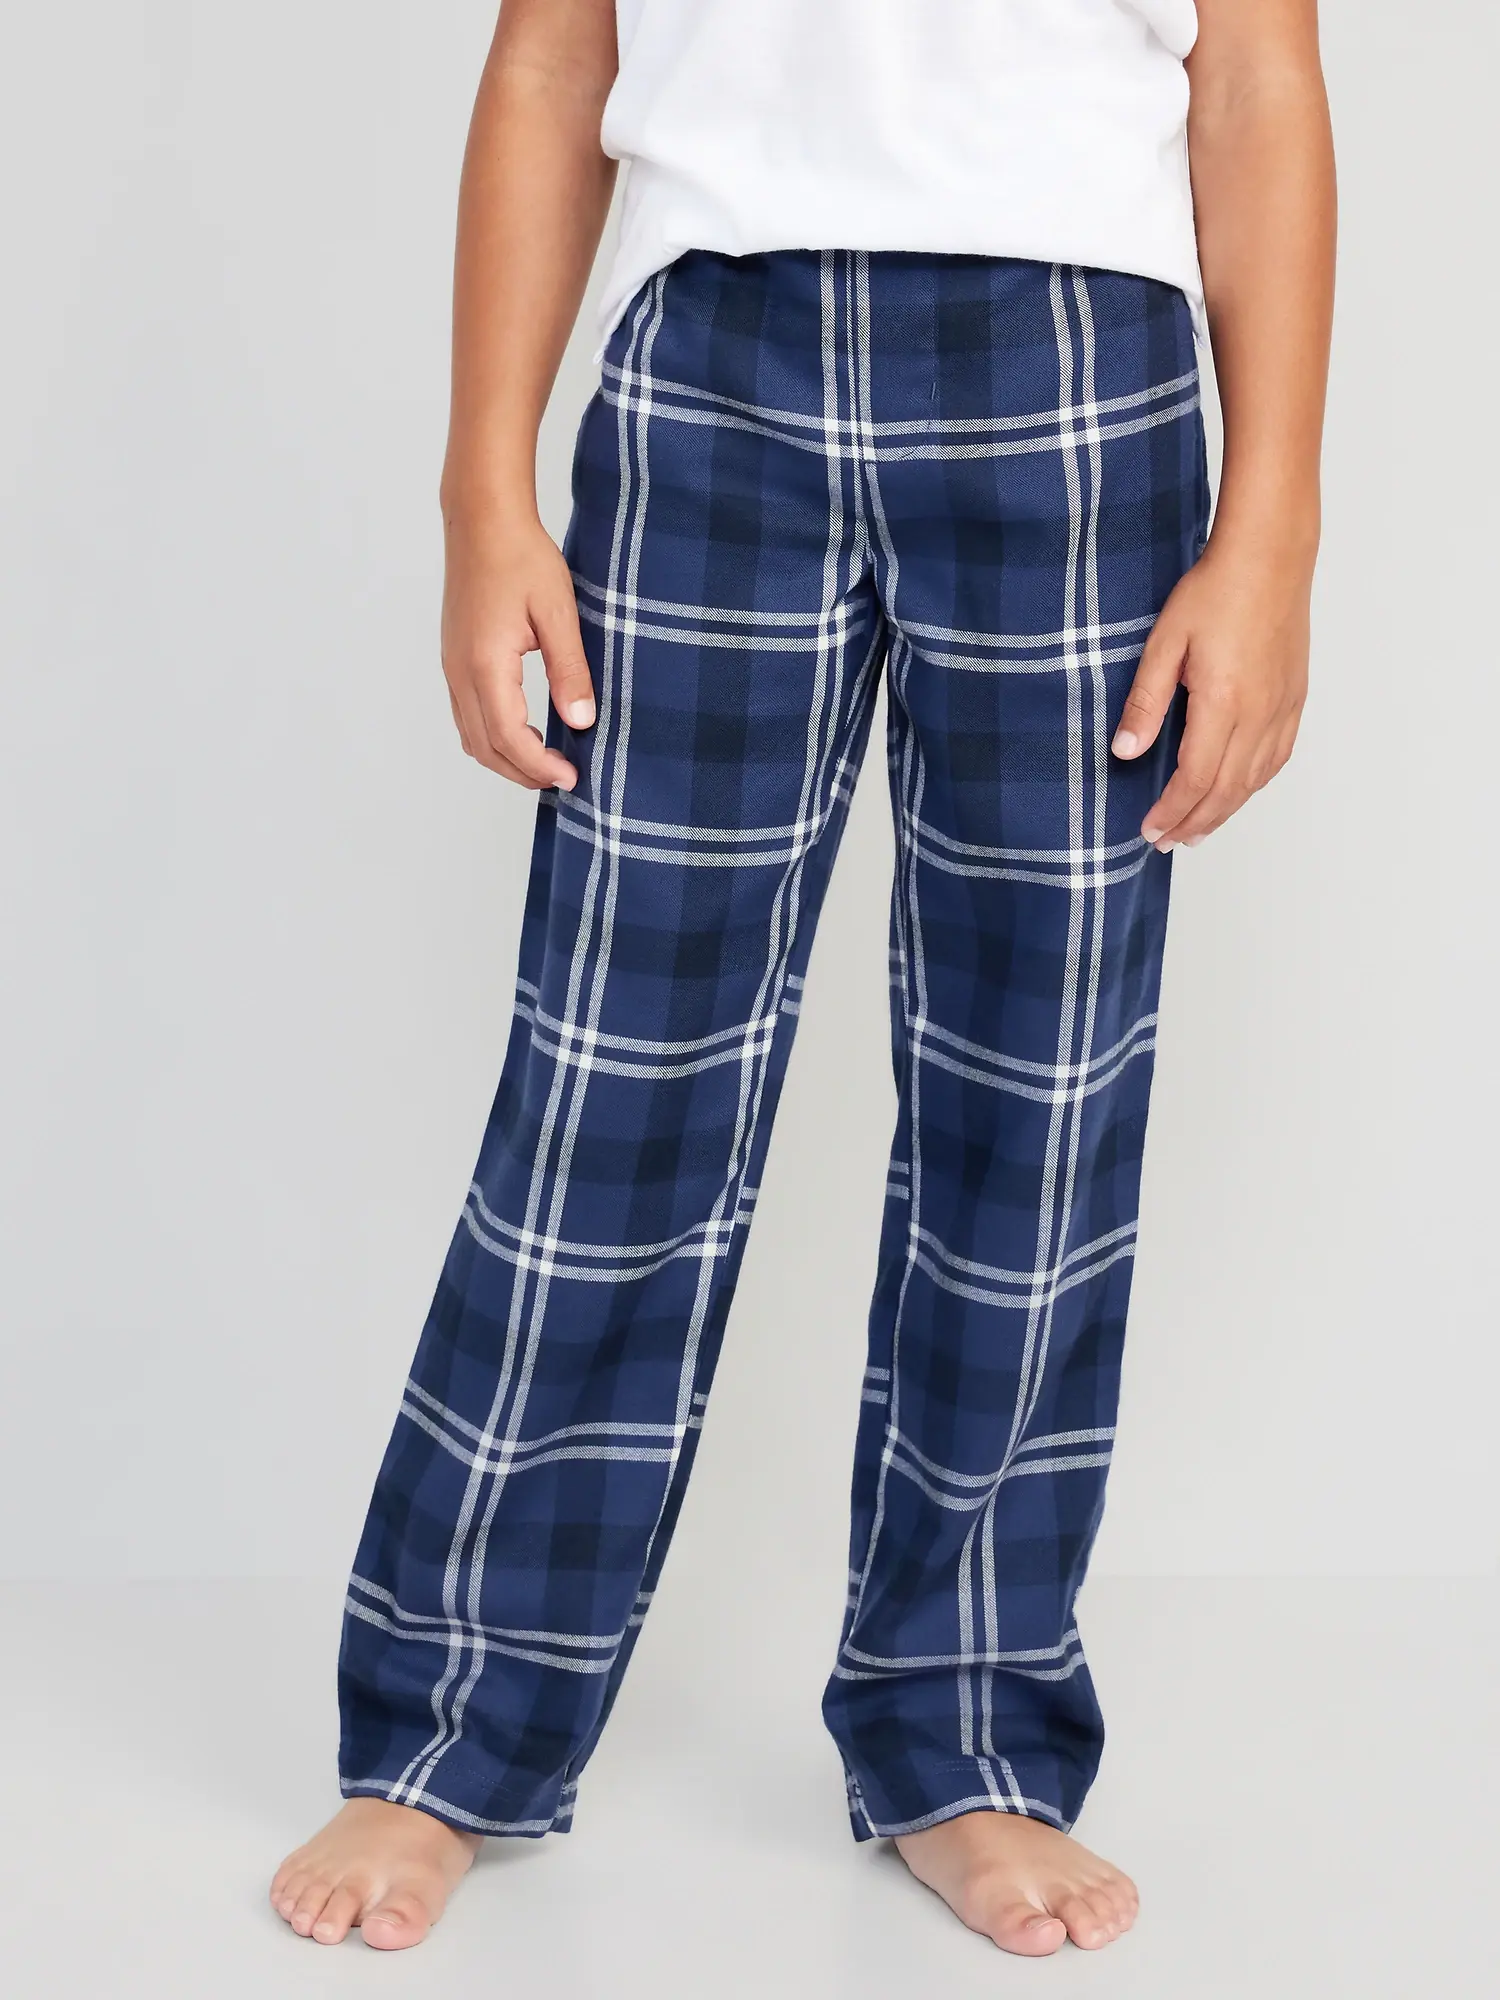 Old Navy Straight Printed Flannel Pajama Pants for Boys blue. 1